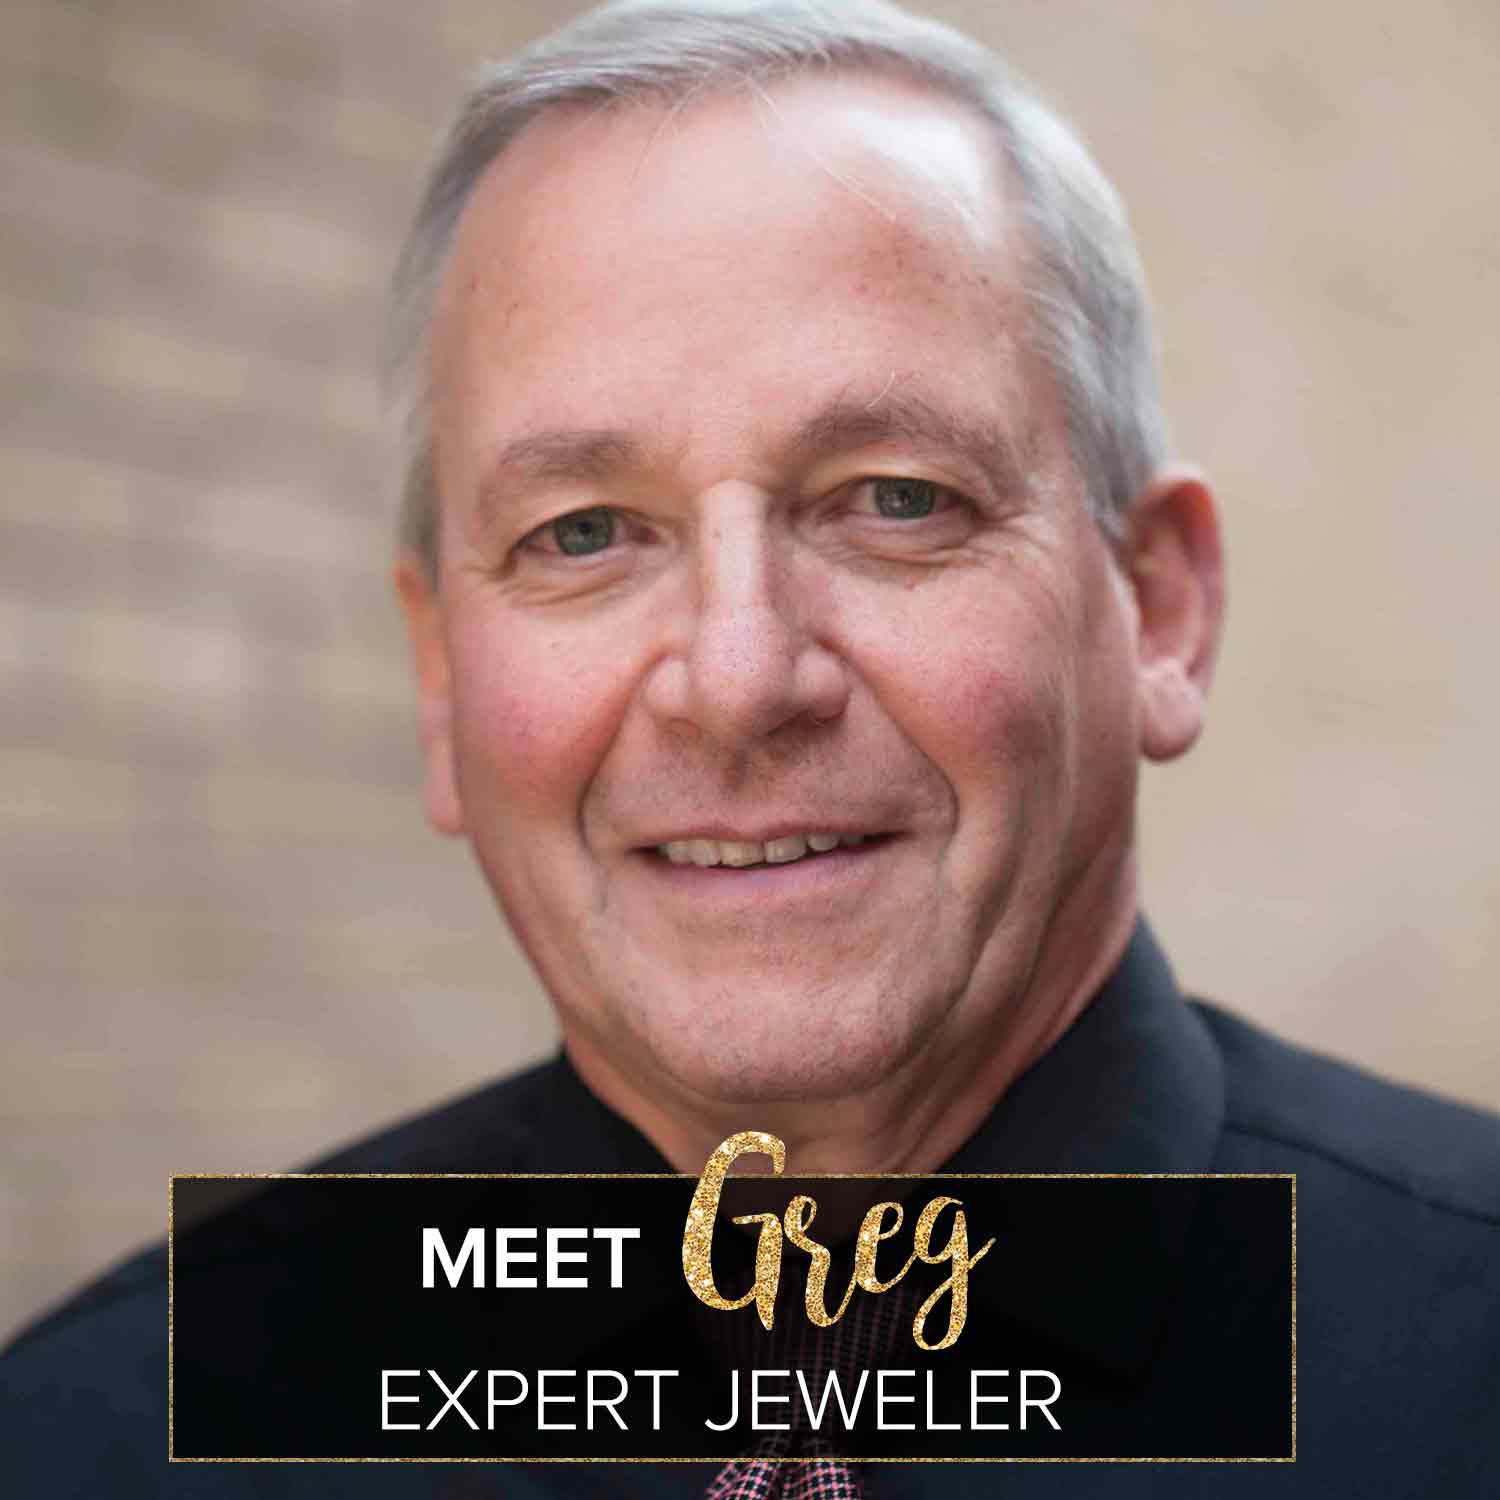 A picture of our expert jeweler, Greg